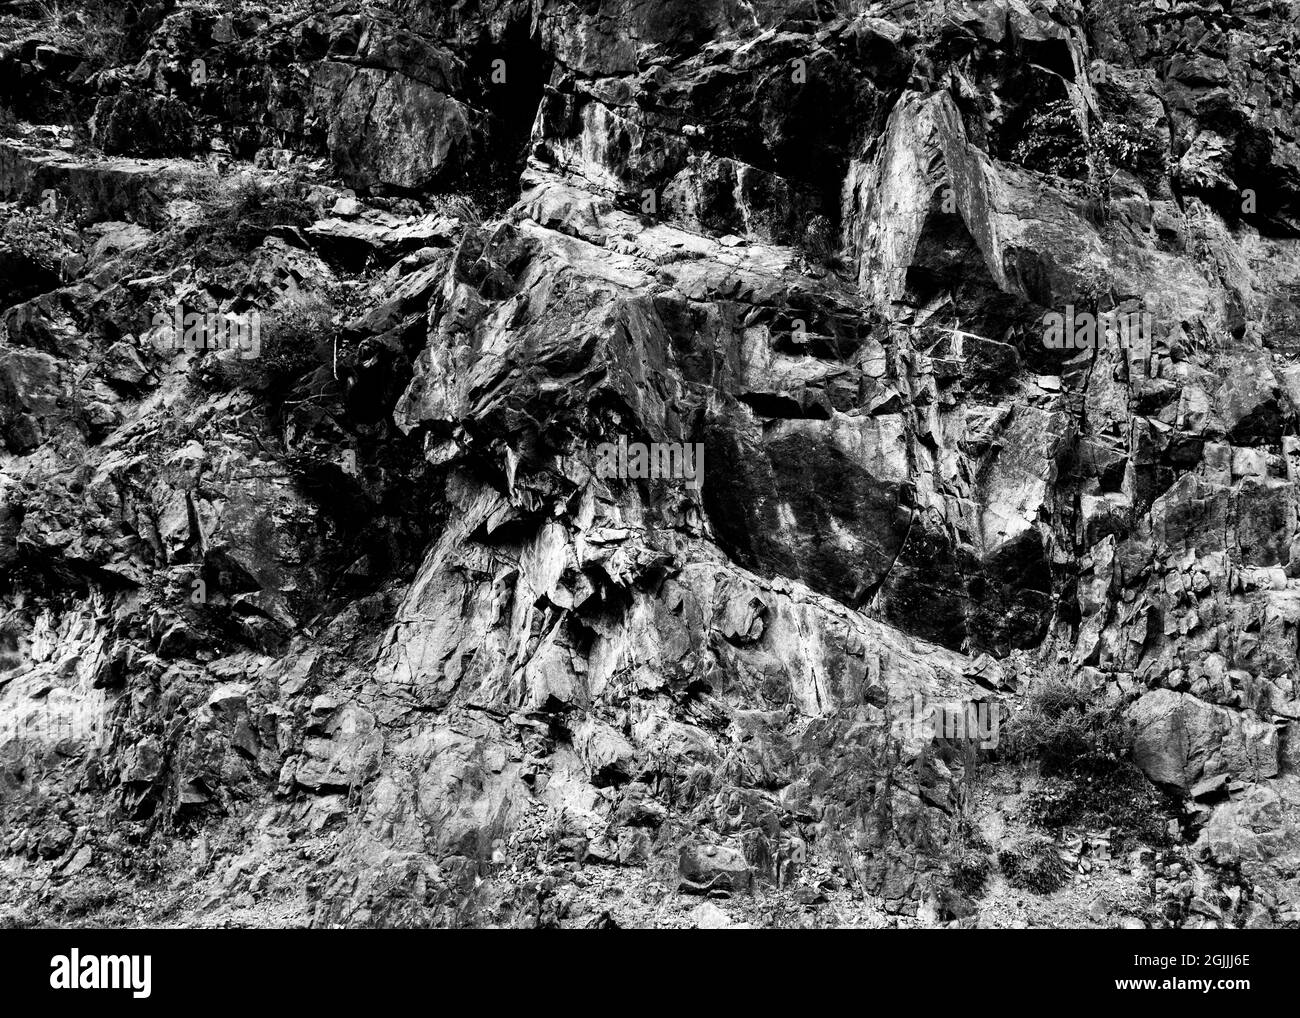 Contrasting black and white mountain slope image, close up Stock Photo